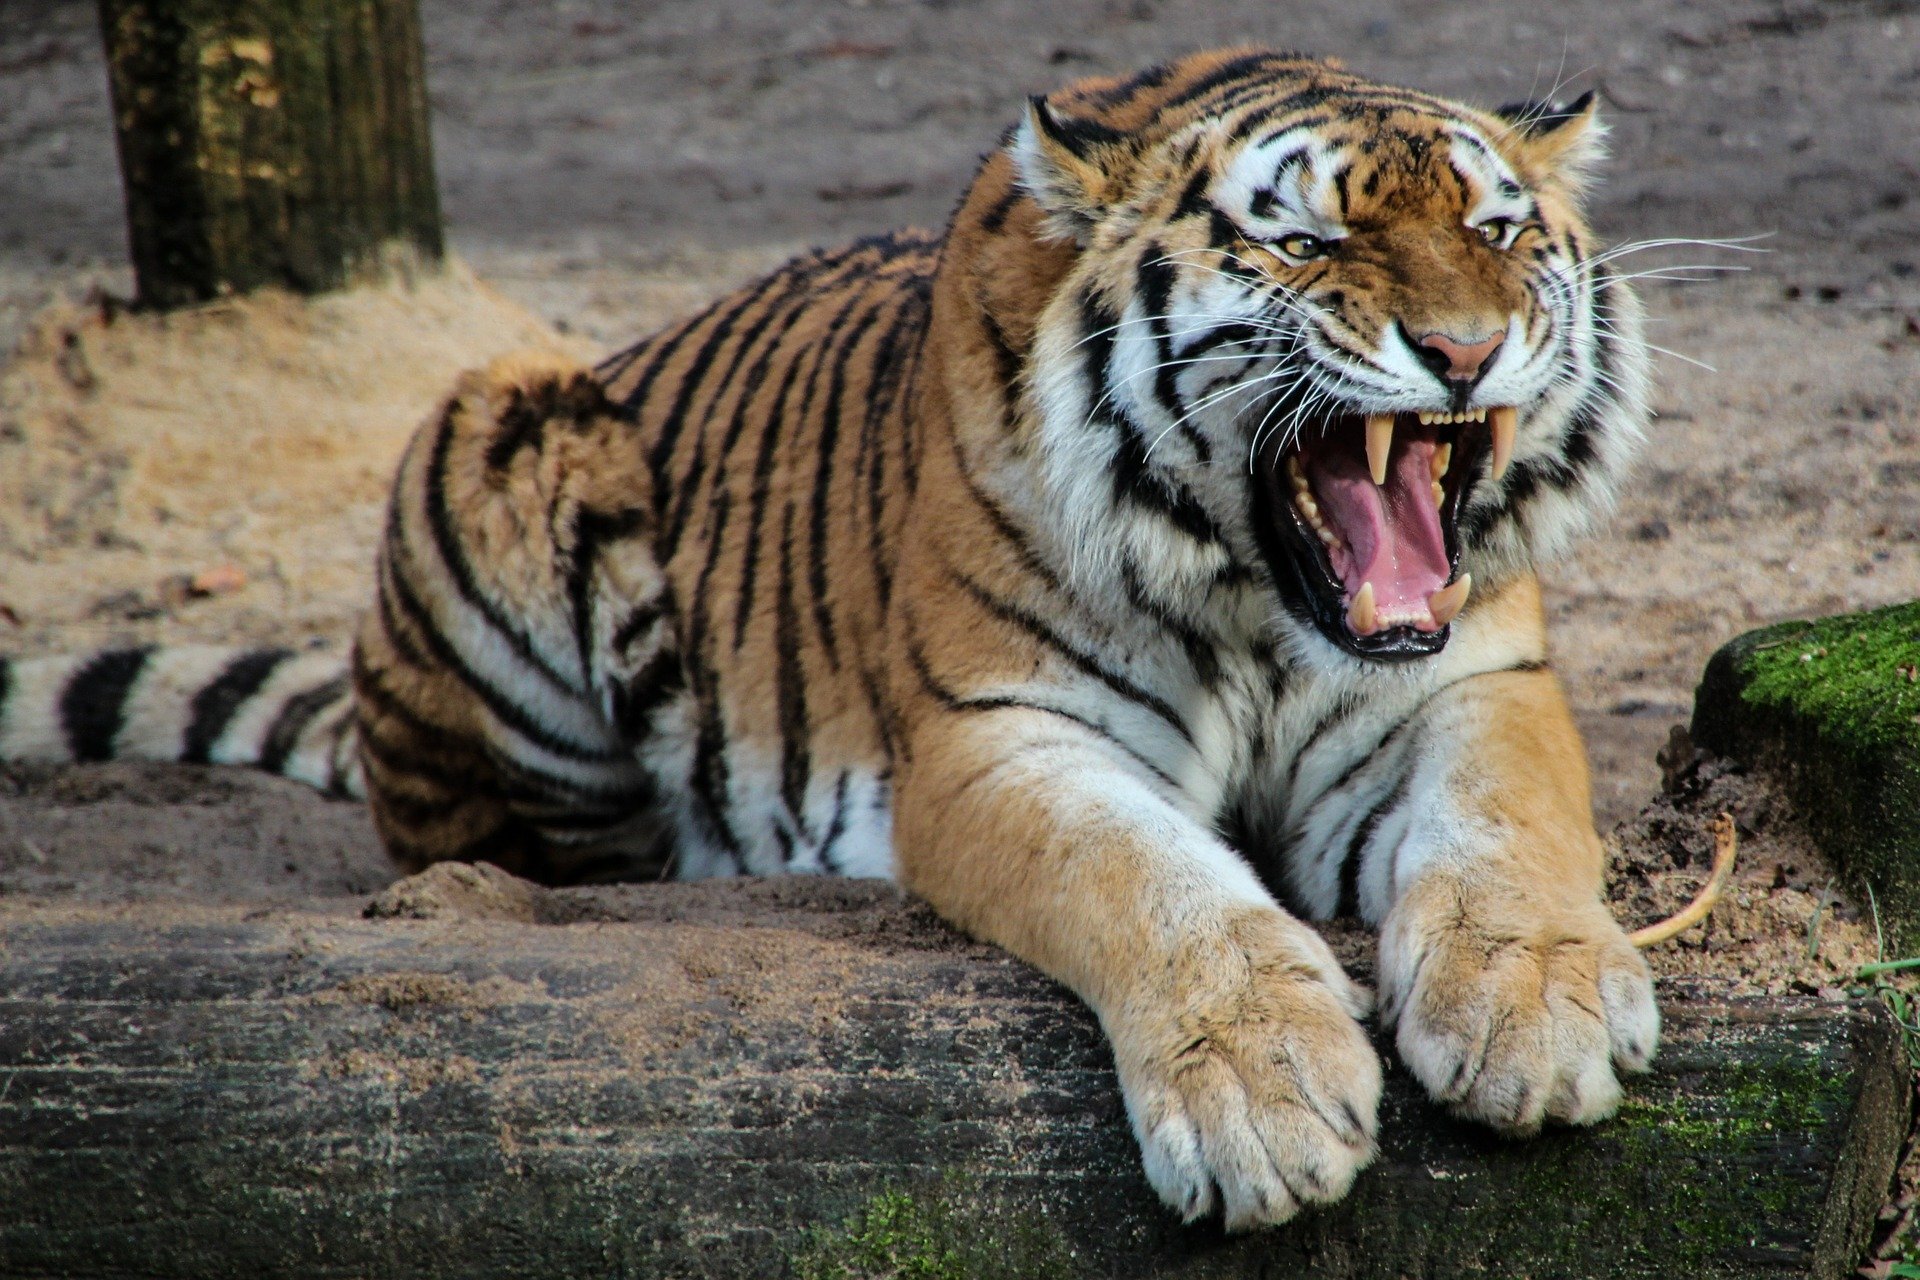 Why you shouldn’t declaw tigers or other big cats